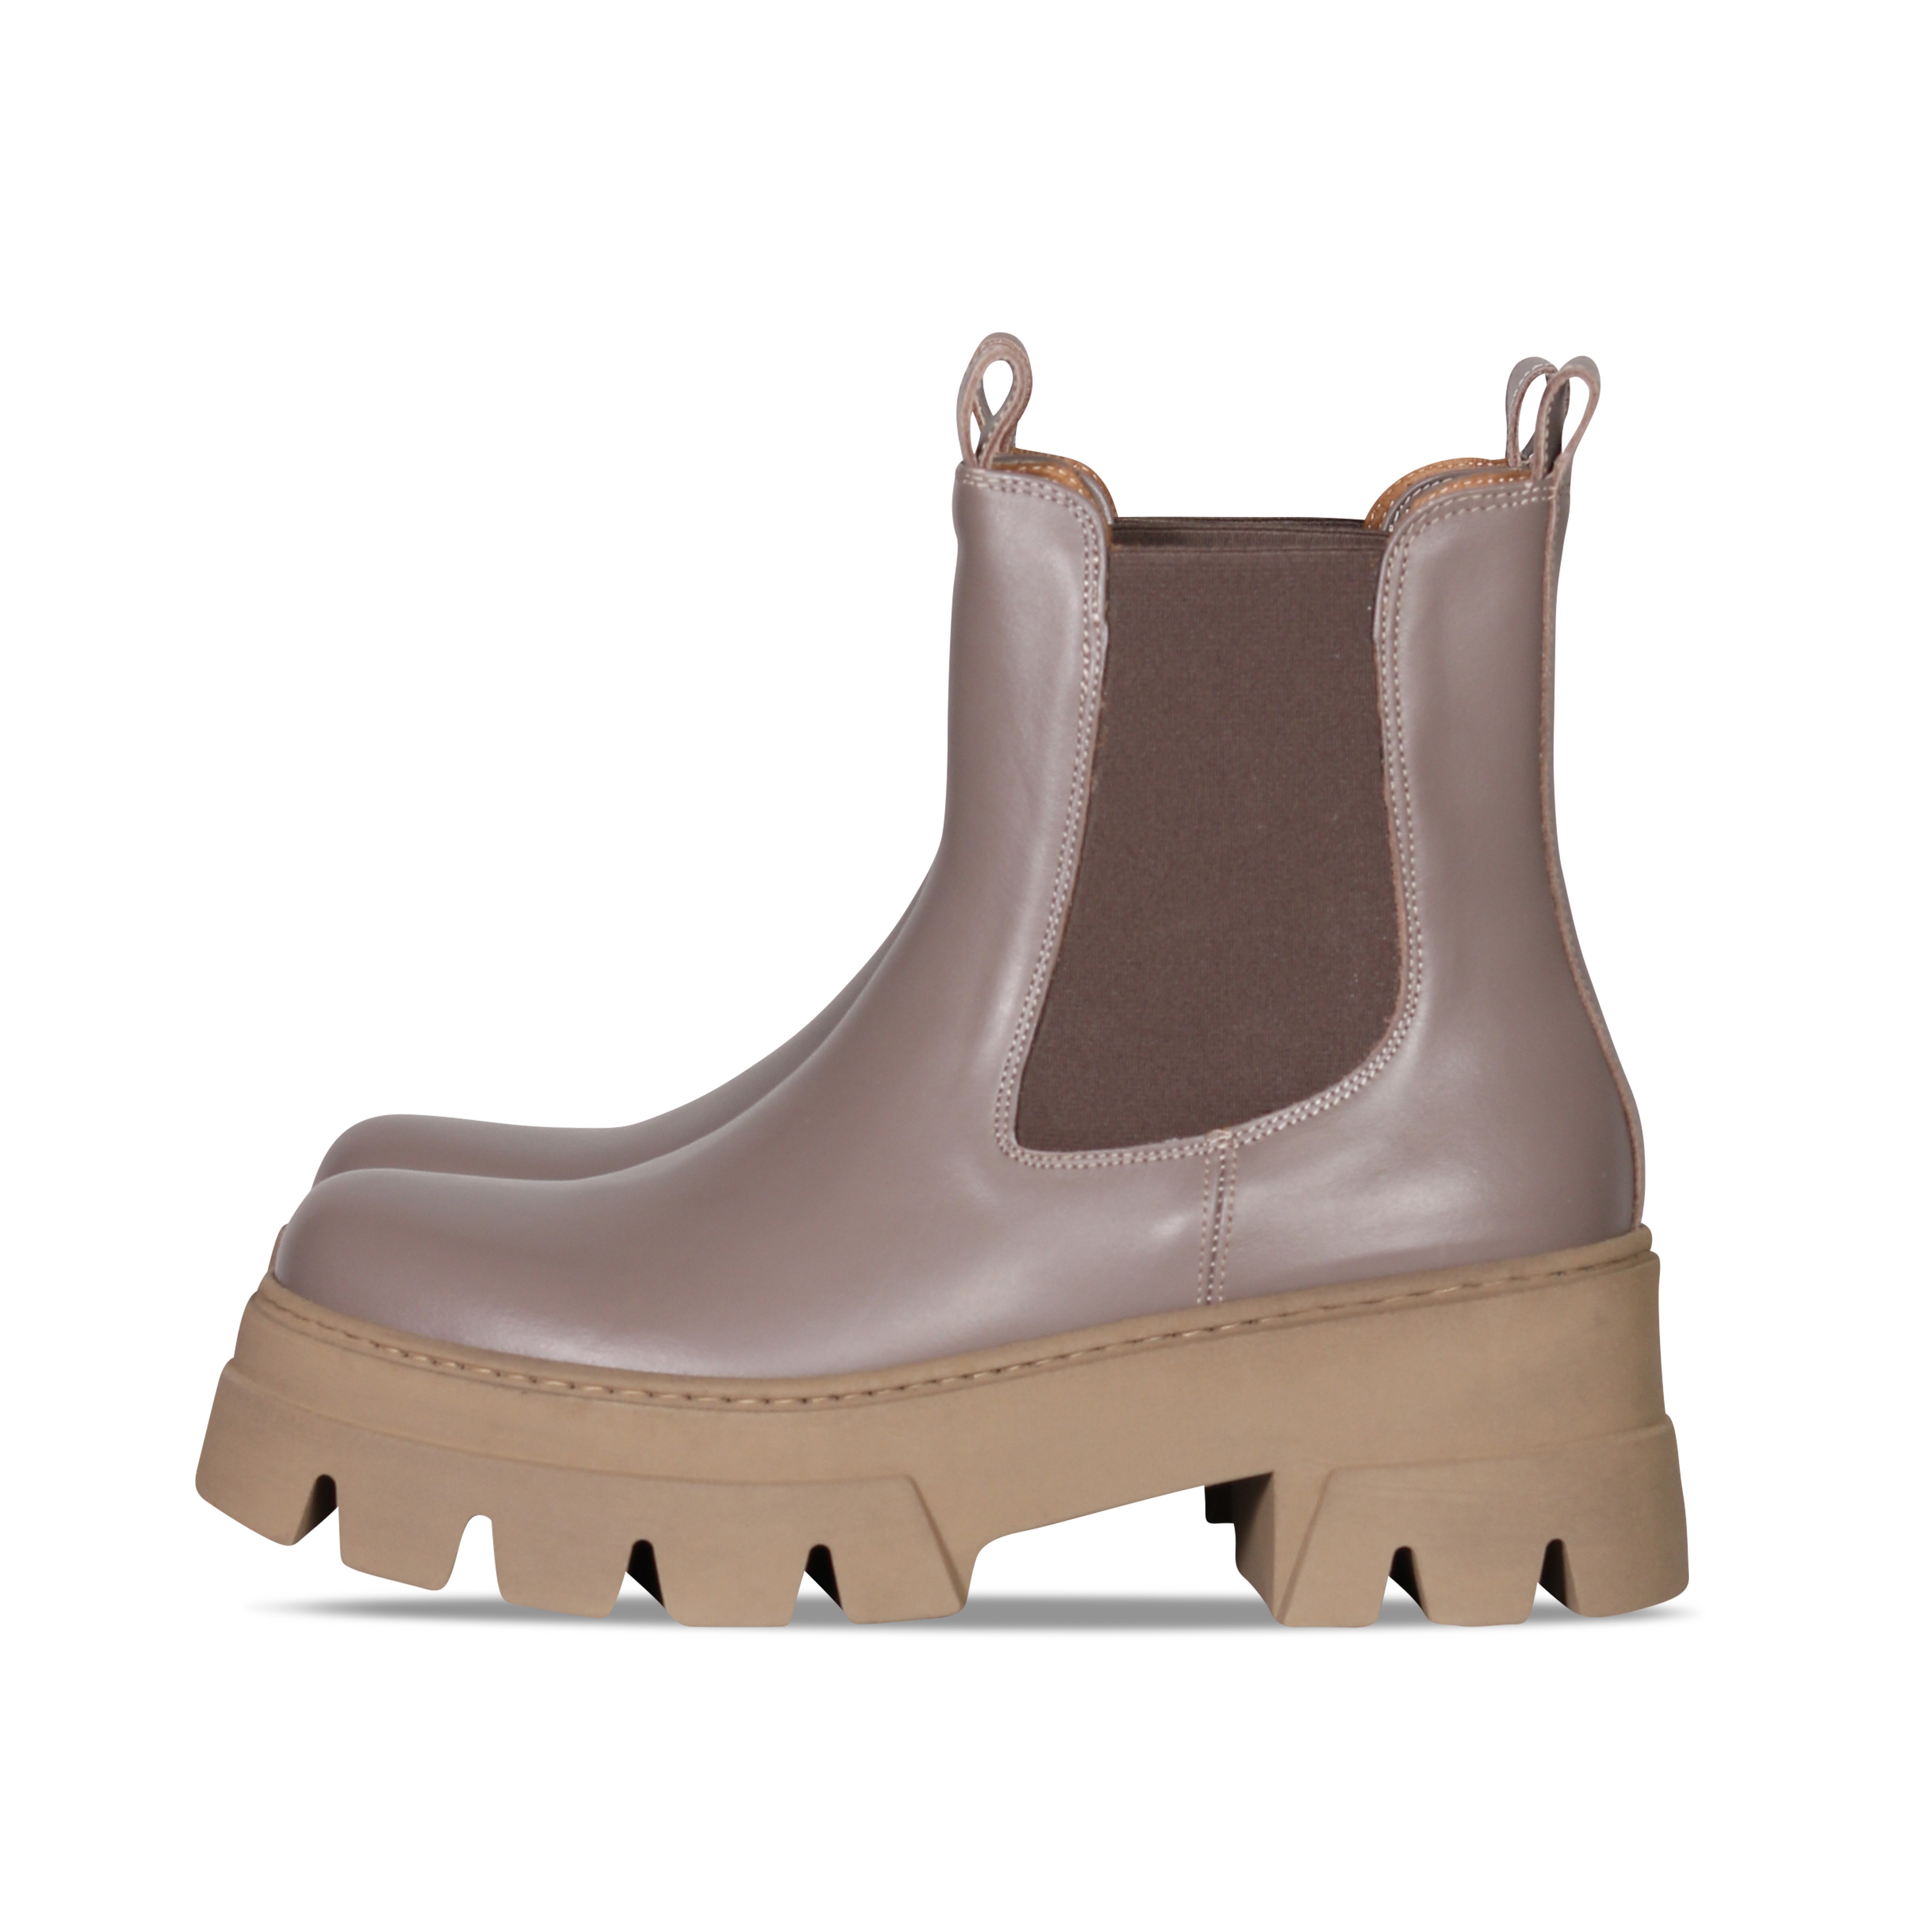 Ennequadro Chelsea Combat Boots in Greige/Beige Sole